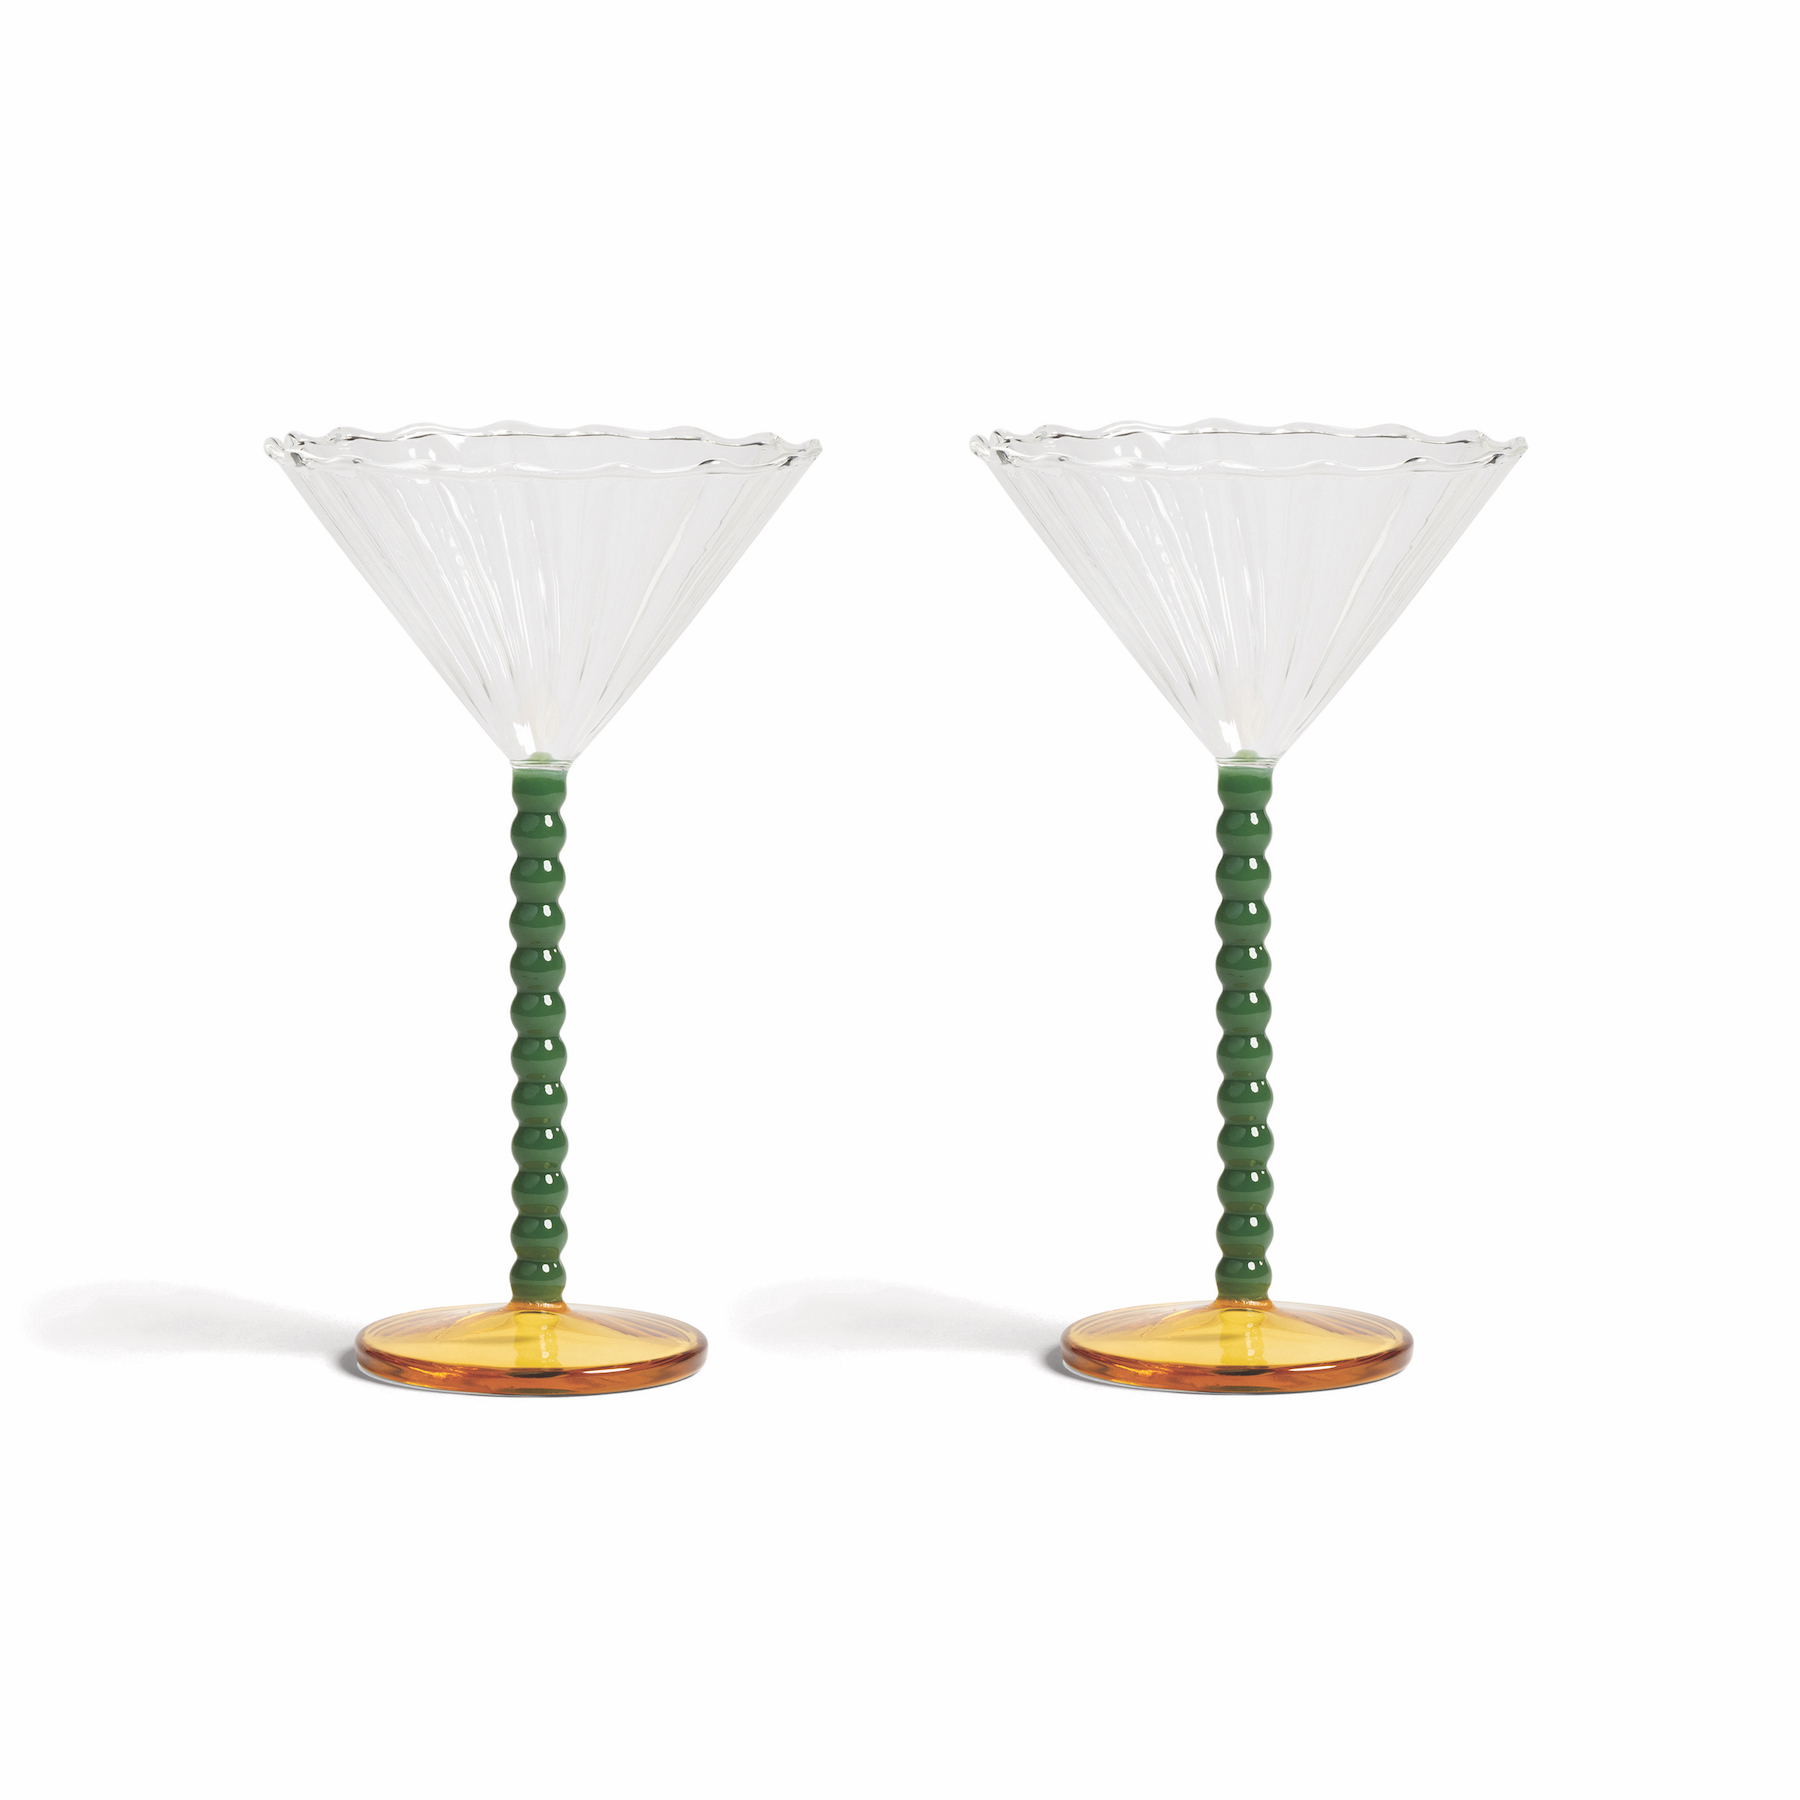 &klevering Perle Cocktail Glass - Set of 2